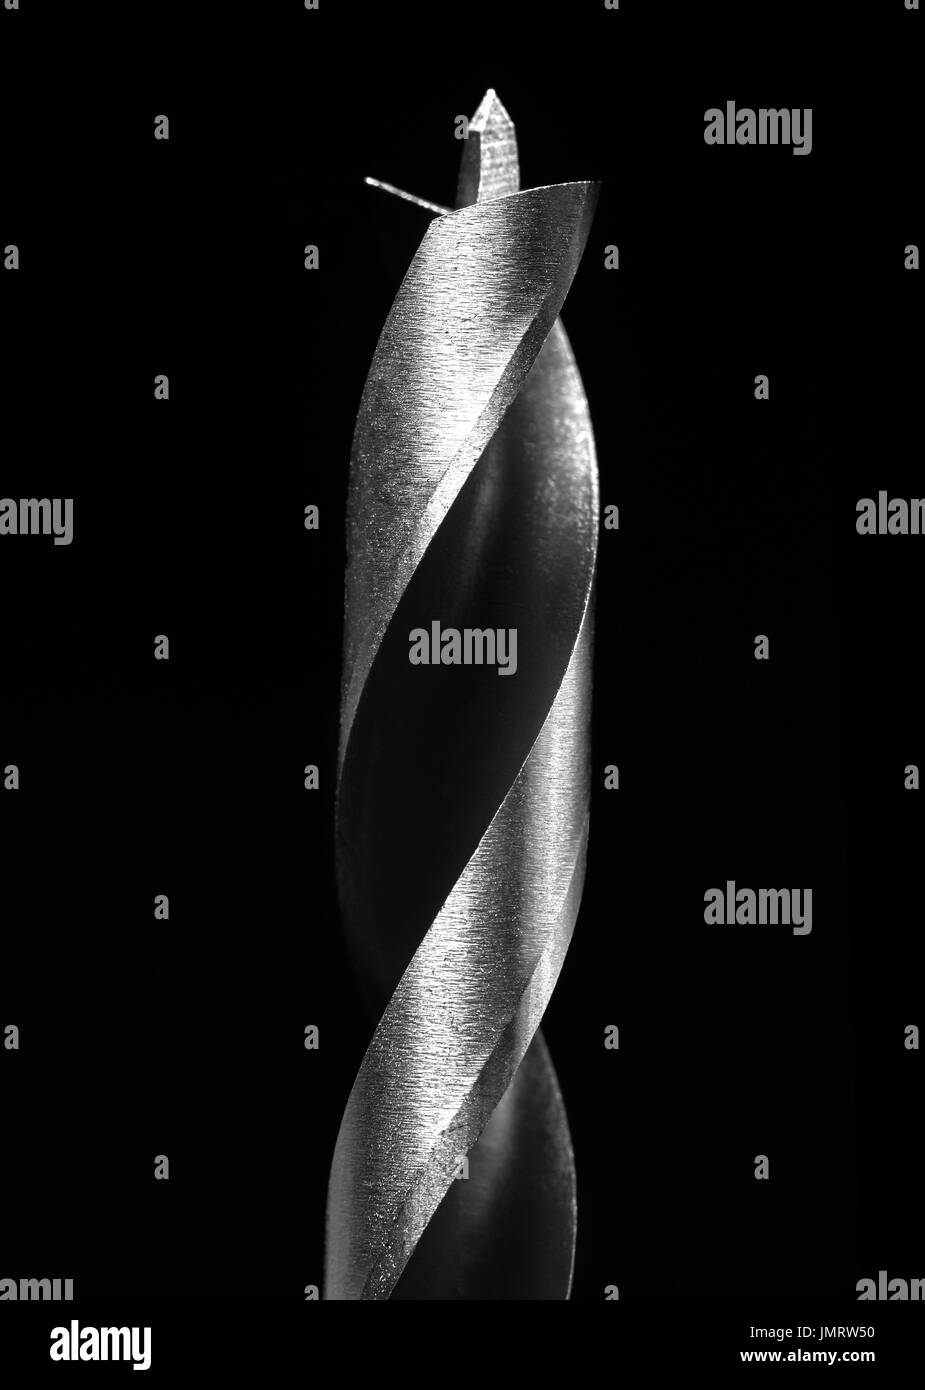 Drill Bit metal set isolated on black background Stock Photo